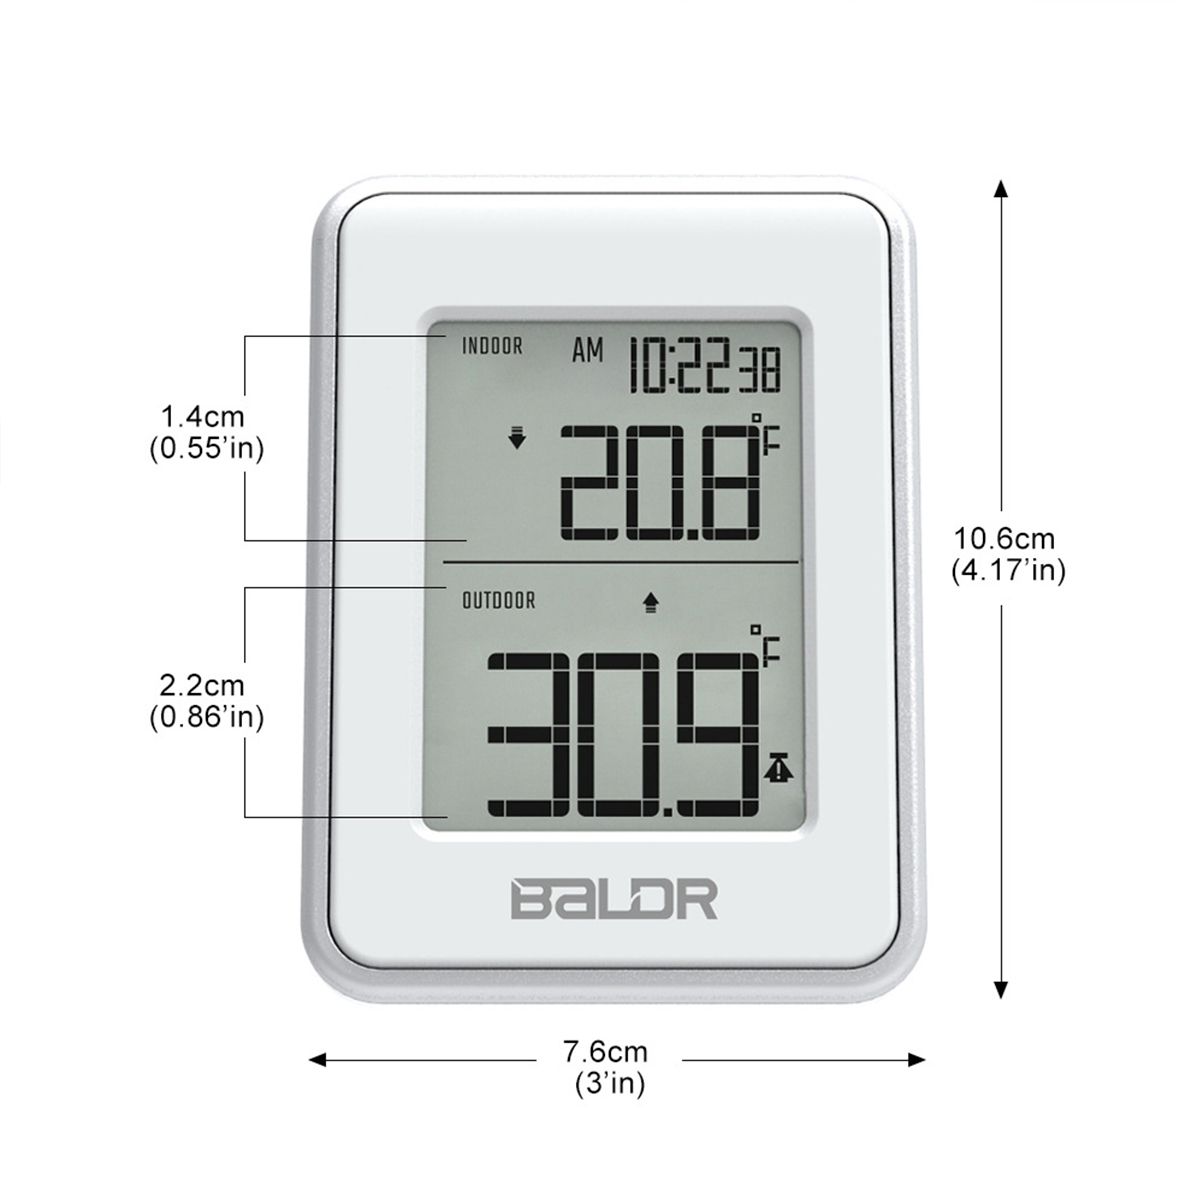 LCD-Display-Digital-Wireless-Indoor-Outdoor-Humidity-Temperature-Thermometer-1652930